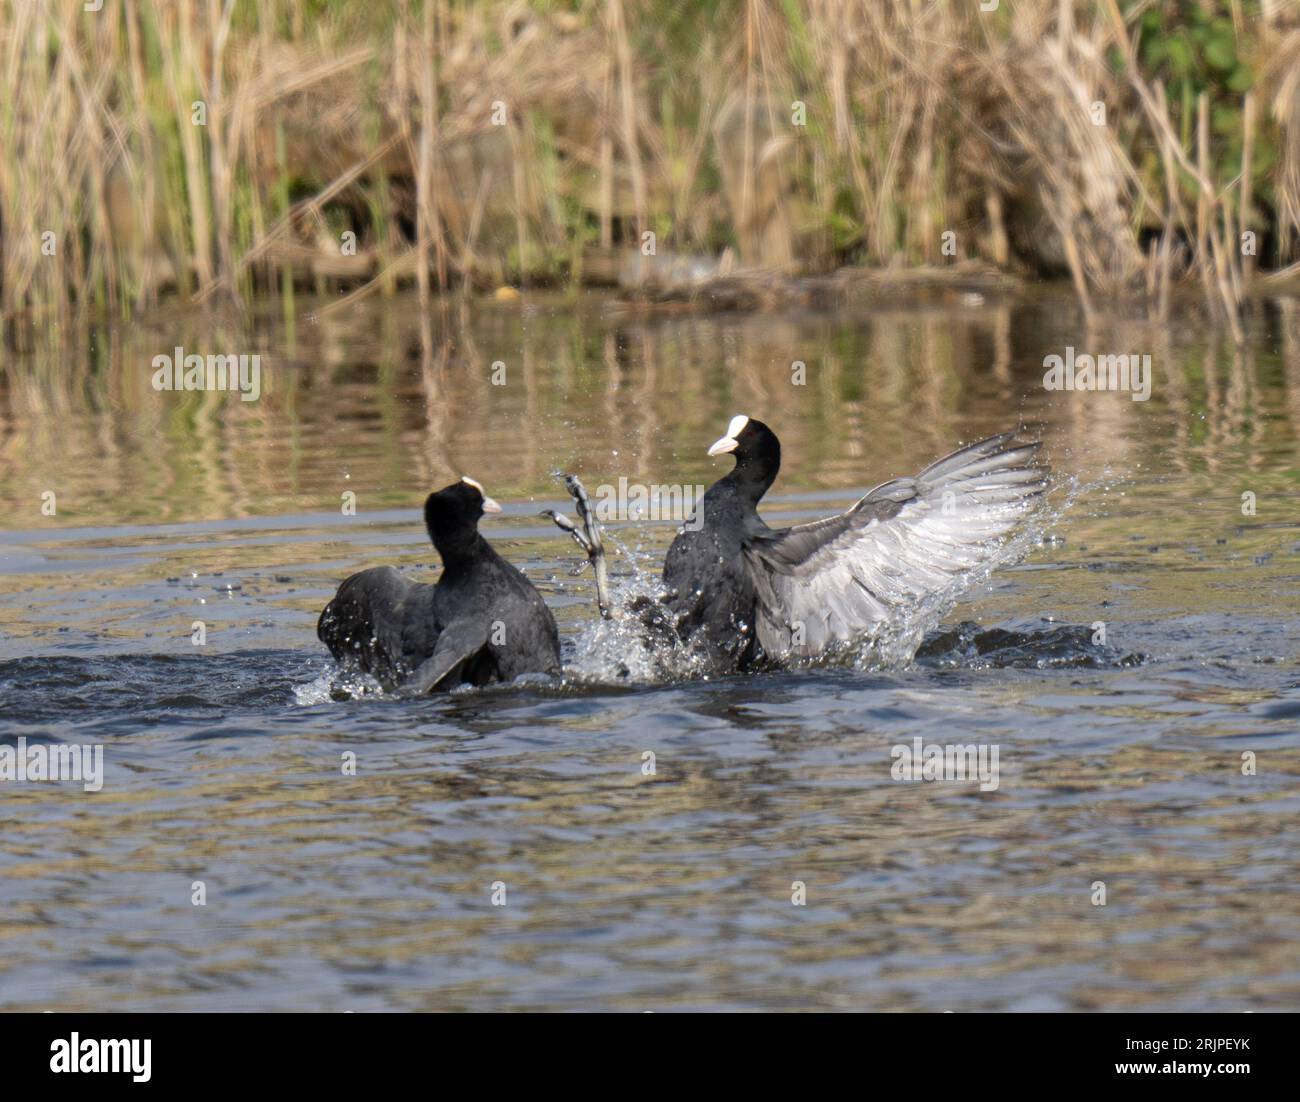 Two black ducks engaged in a playful splash battle in a shallow pond Stock Photo